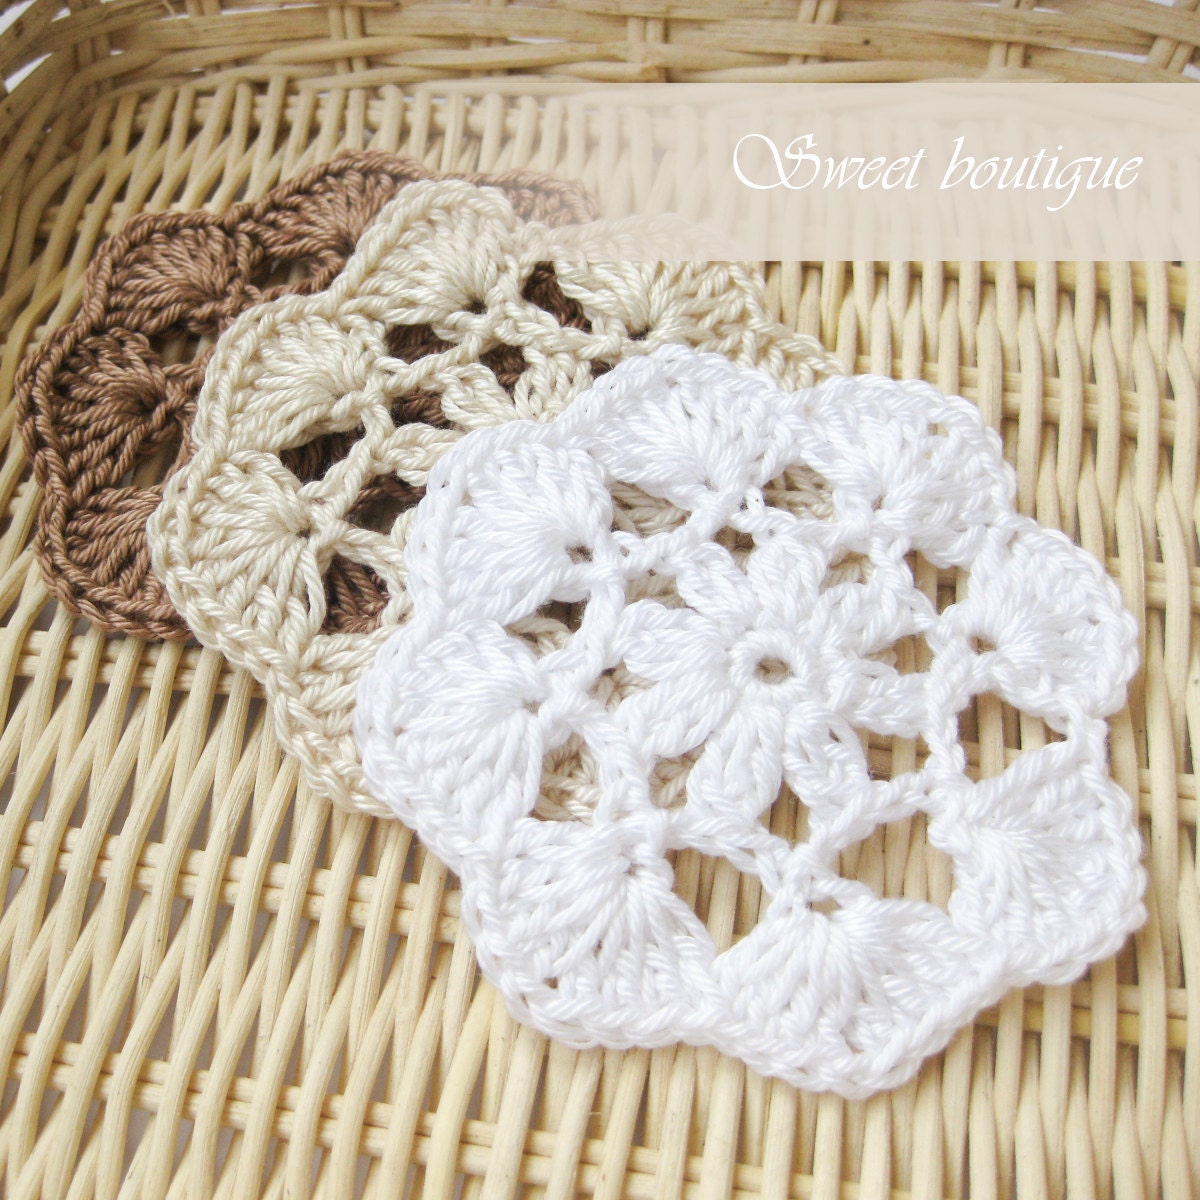 Rustic woodland Crochet flower appliques Wedding Decoration Embellishment Scrapbooking natural color set of 6 - brown beige white - MSweetboutique